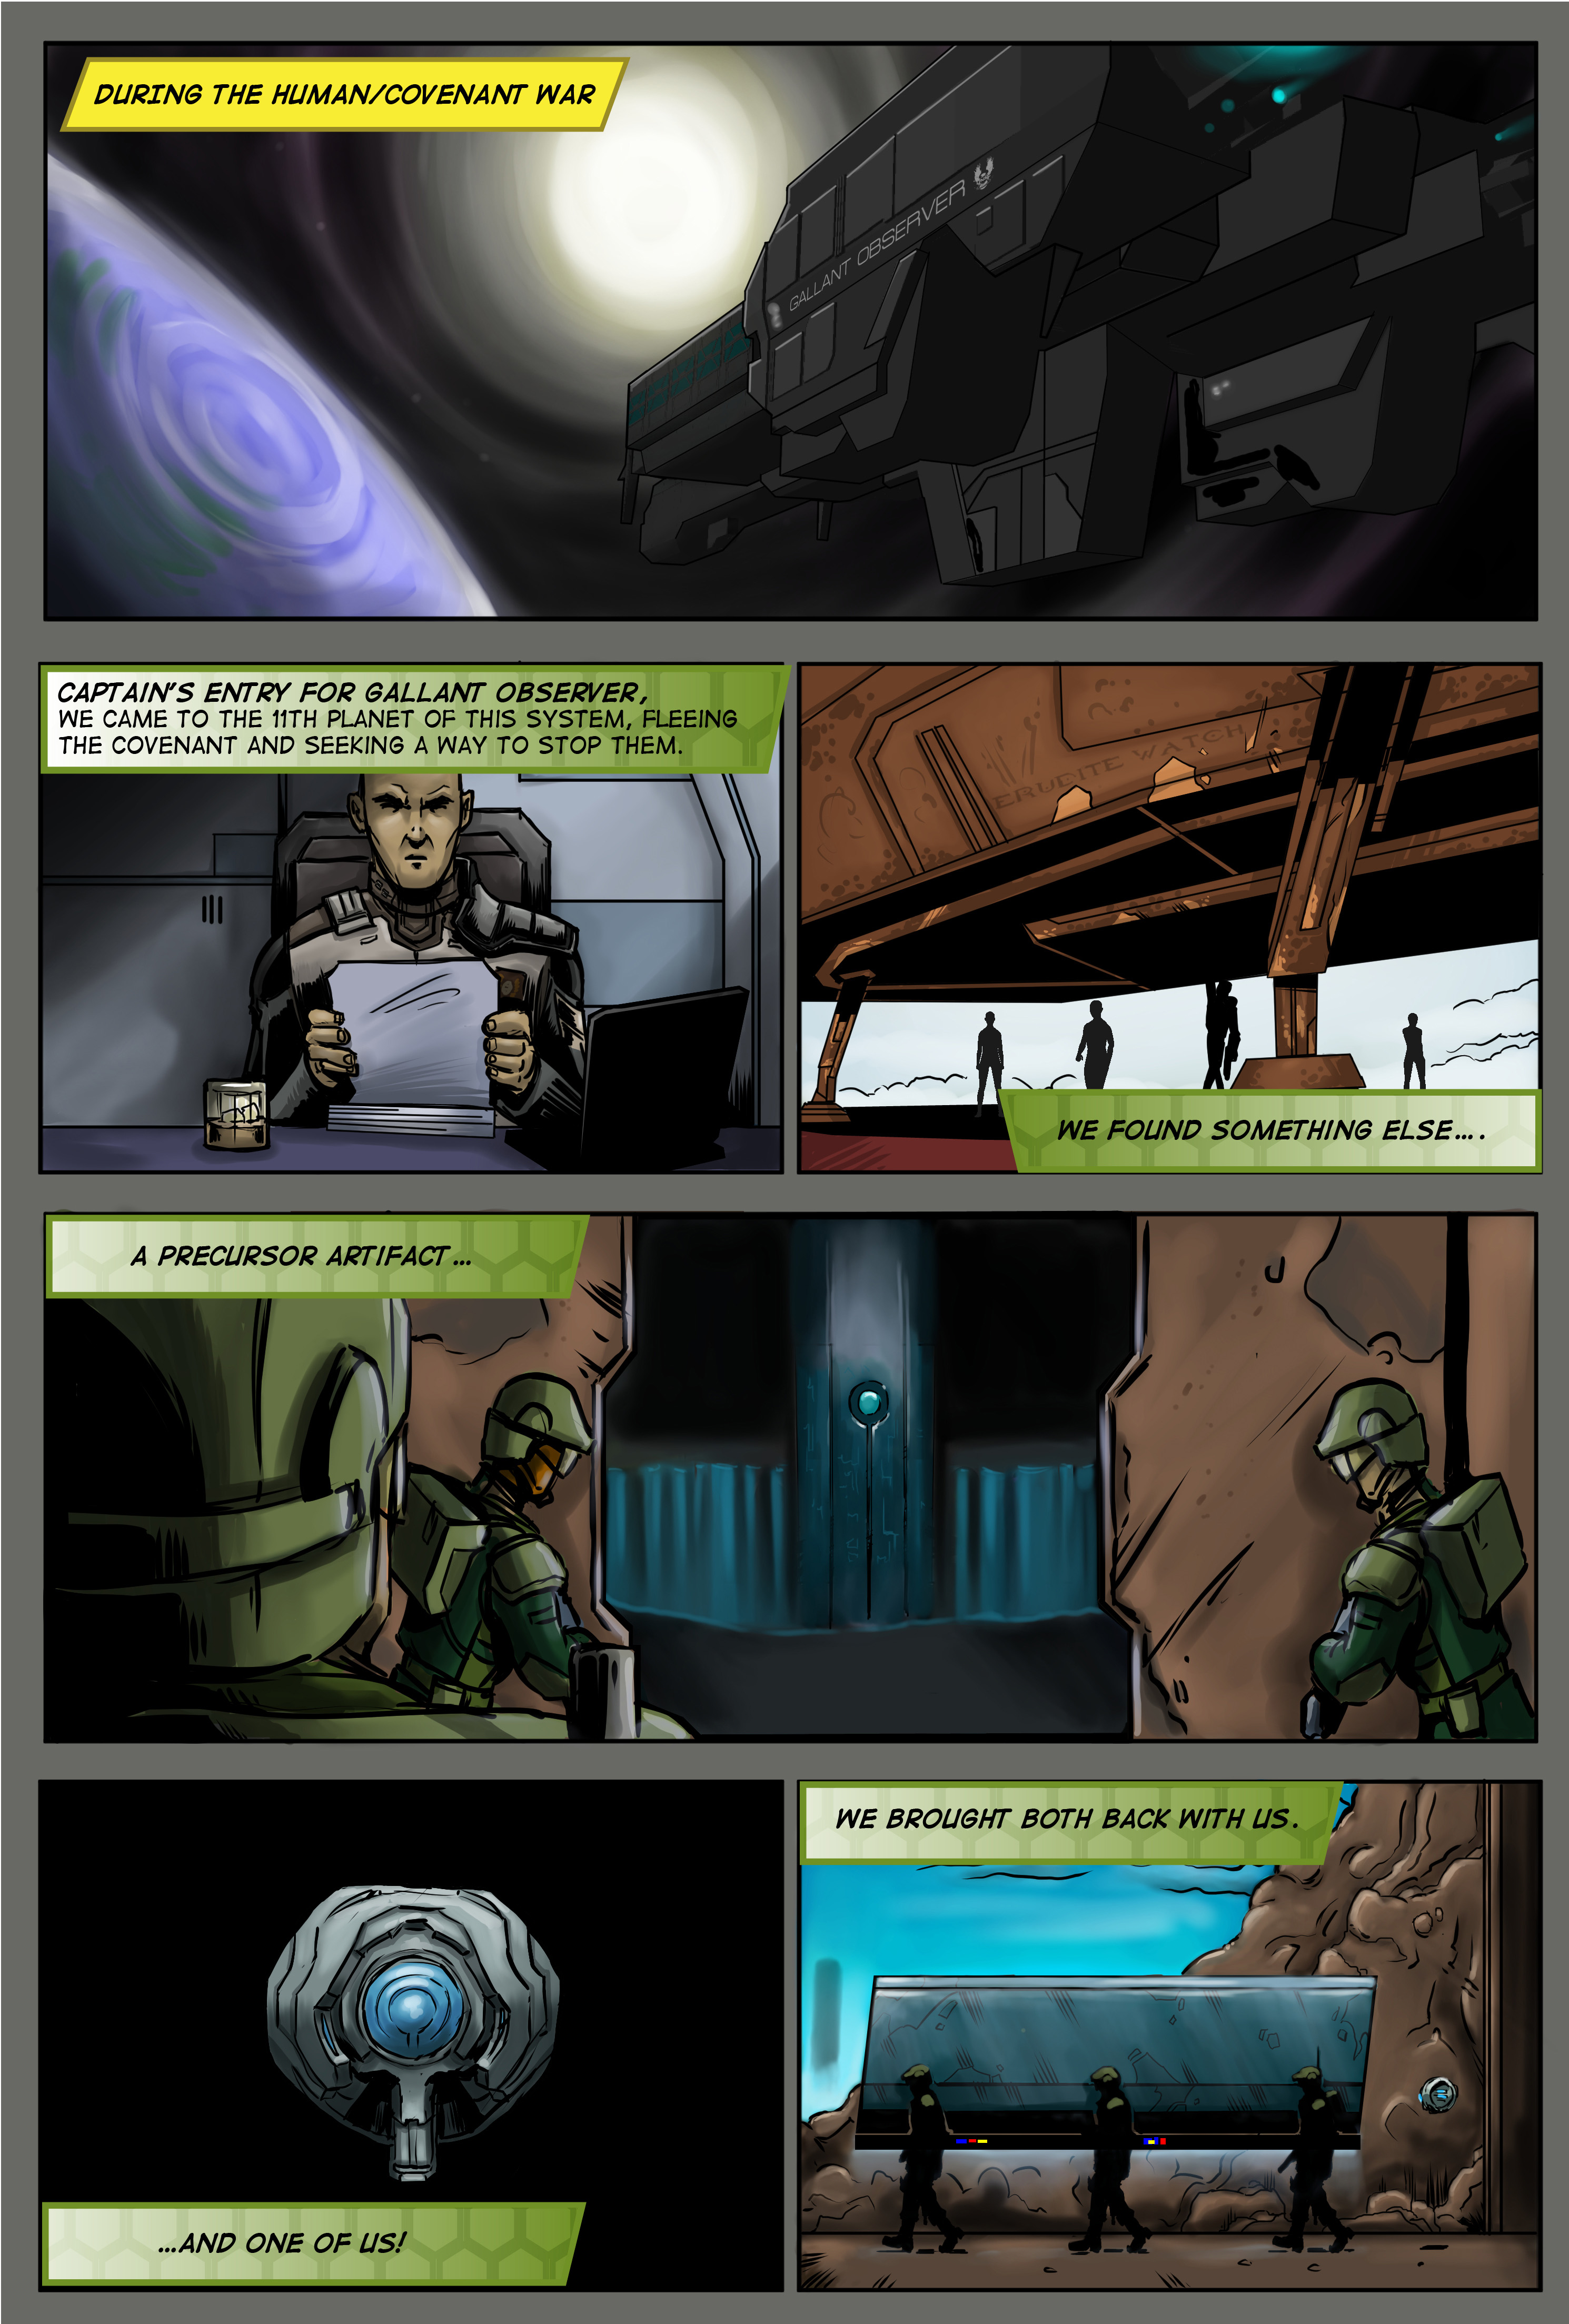 581 - A HALO Story from the 405th - Page 9.jpg